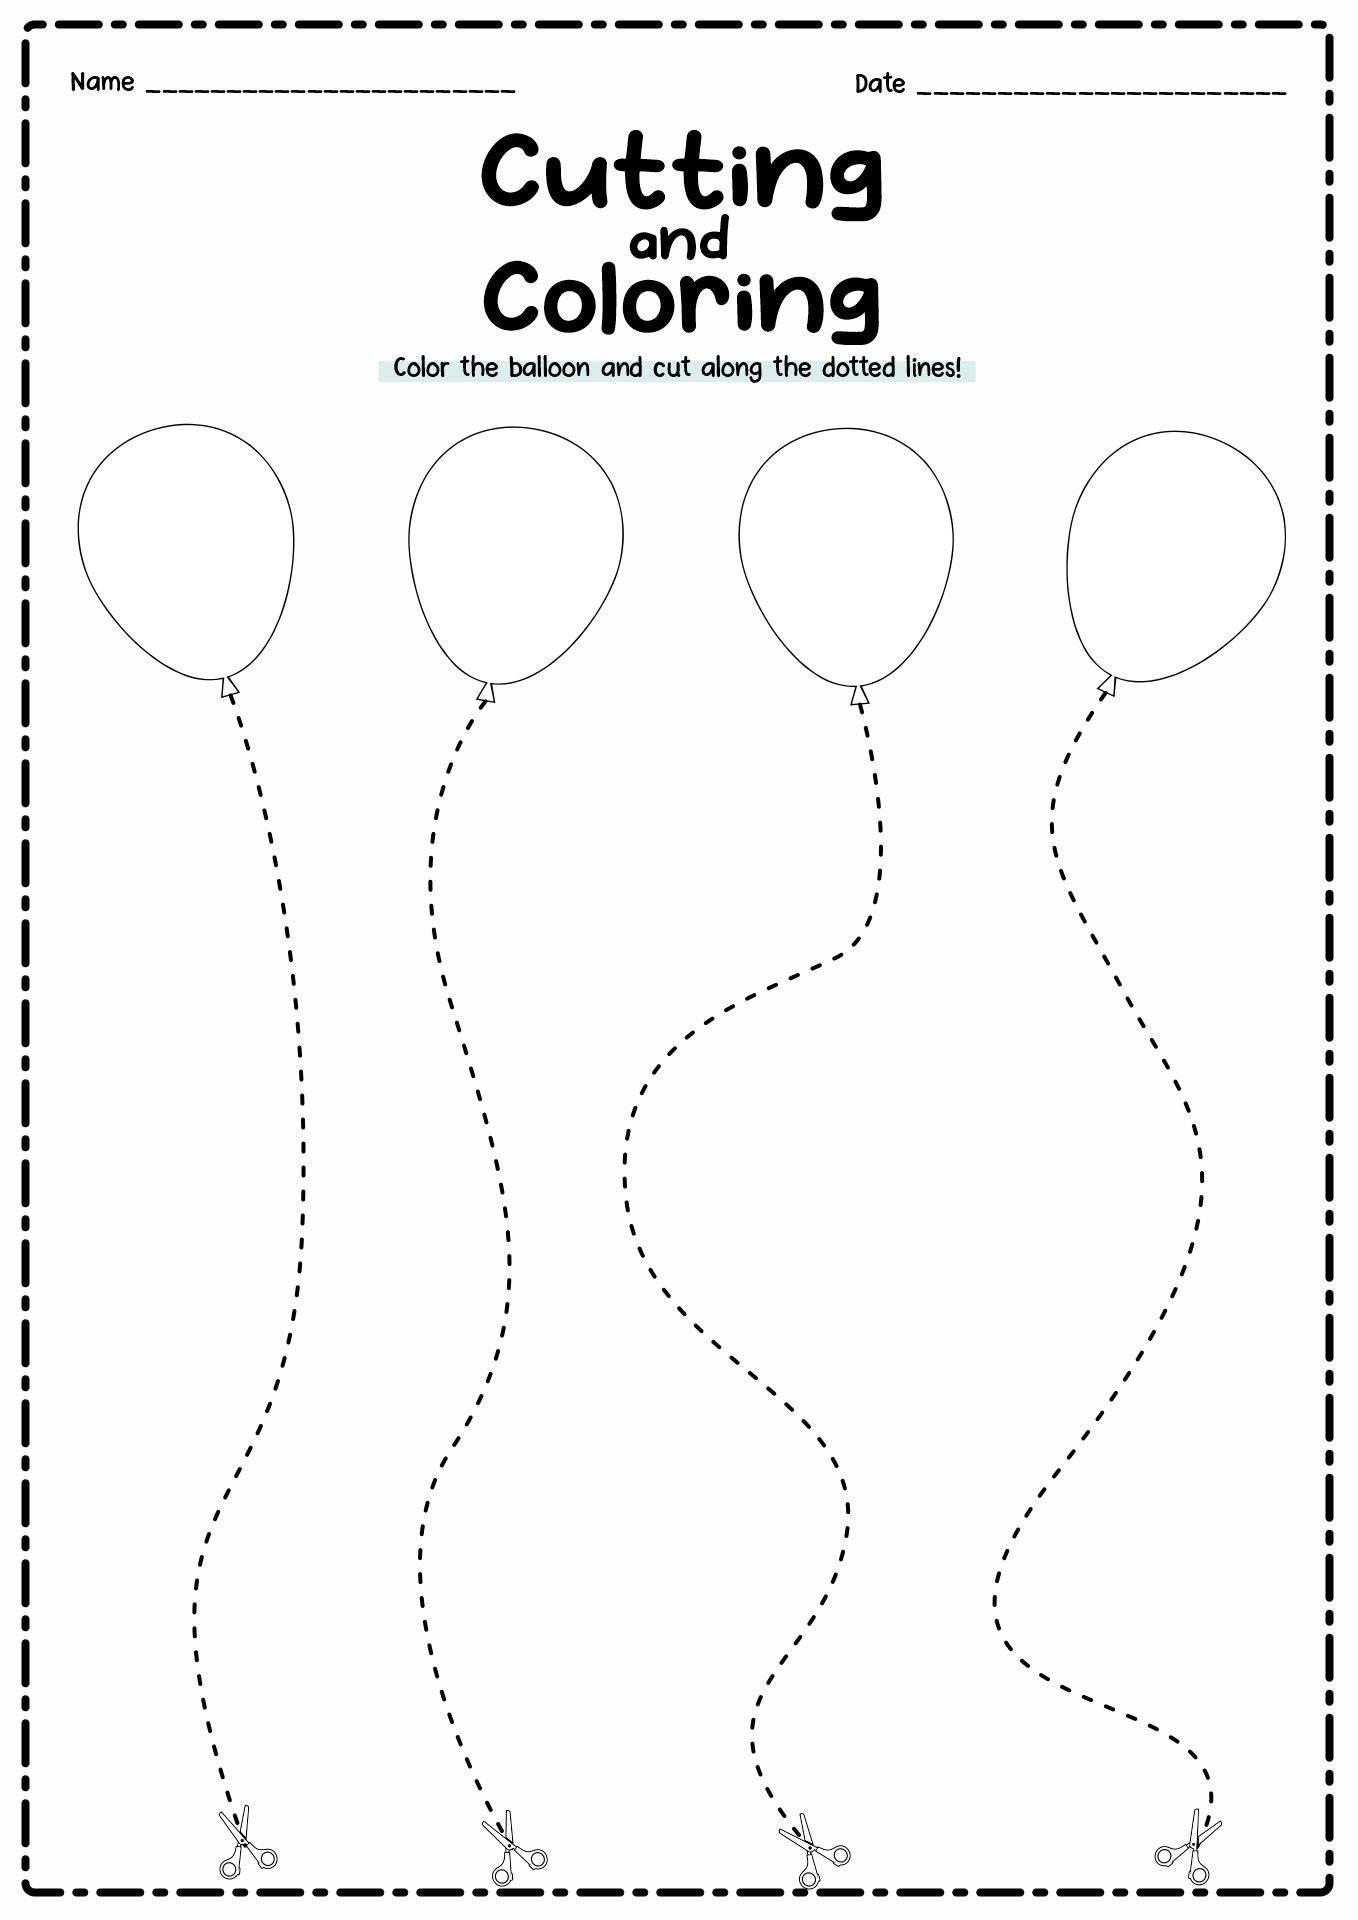 13 Best Images of Preschool Worksheets Cutting Practice Tree - Cut Out